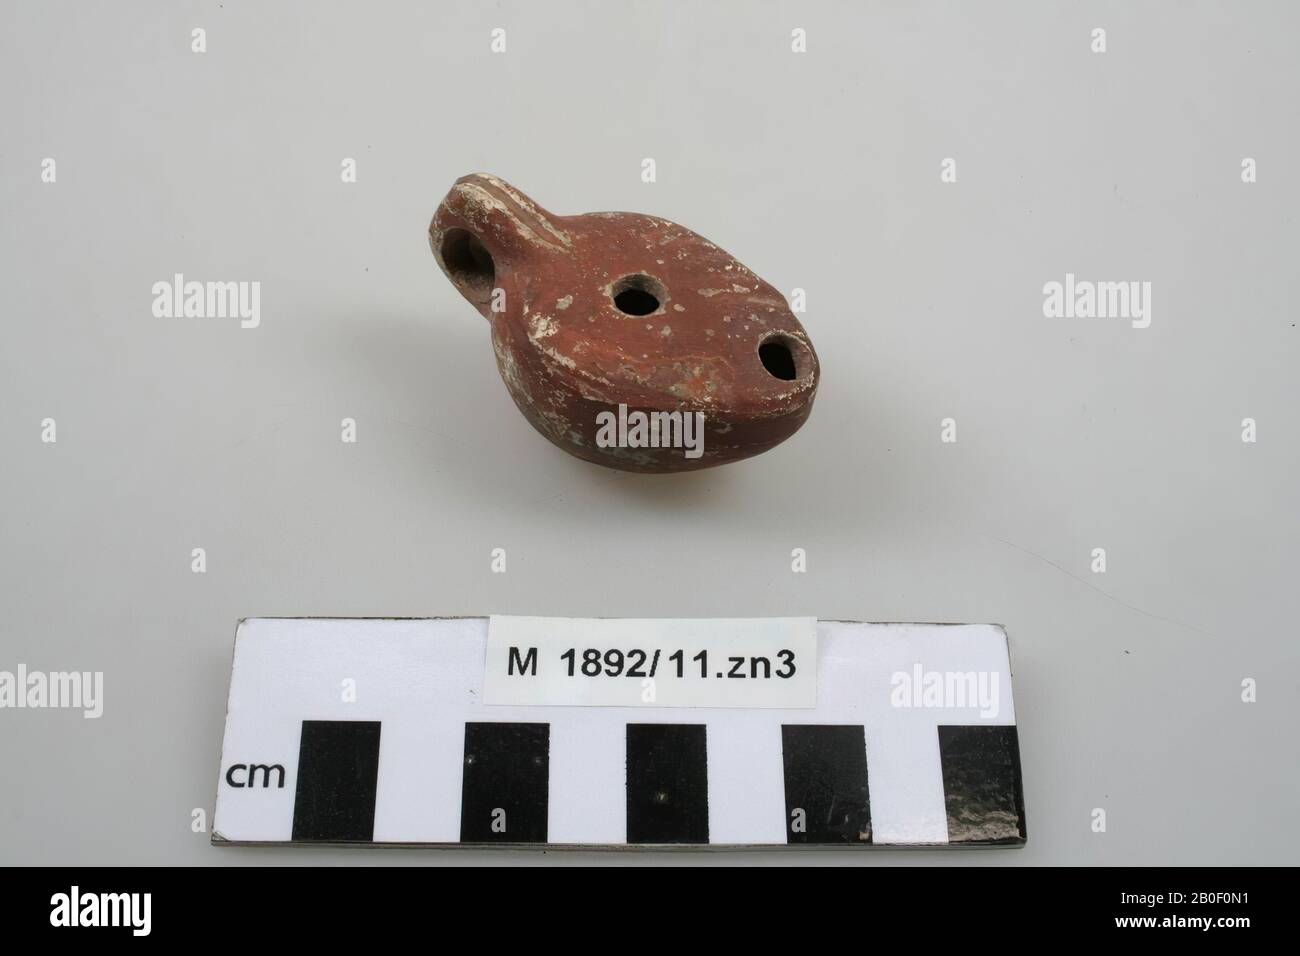 Pottery oil lamp, with ear, semi-spout, filler hole and burner hole, oil lamp, earthenware, 6 x 3.3 x 3.3 cm, Germany Stock Photo